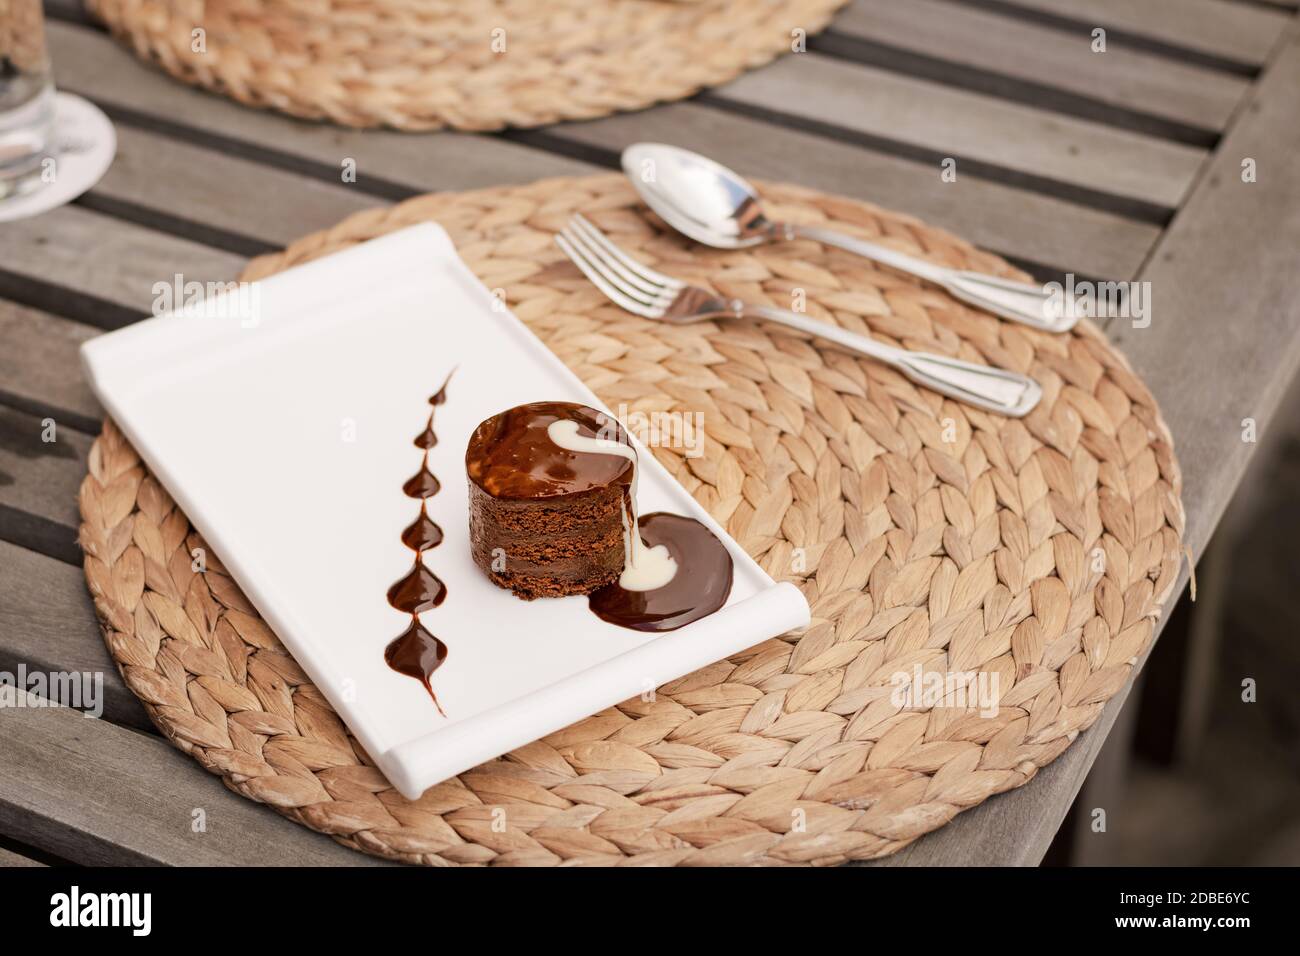 Chocolate fondant cake with cream on a white dish, part of a dessert serving in a restaurant Stock Photo